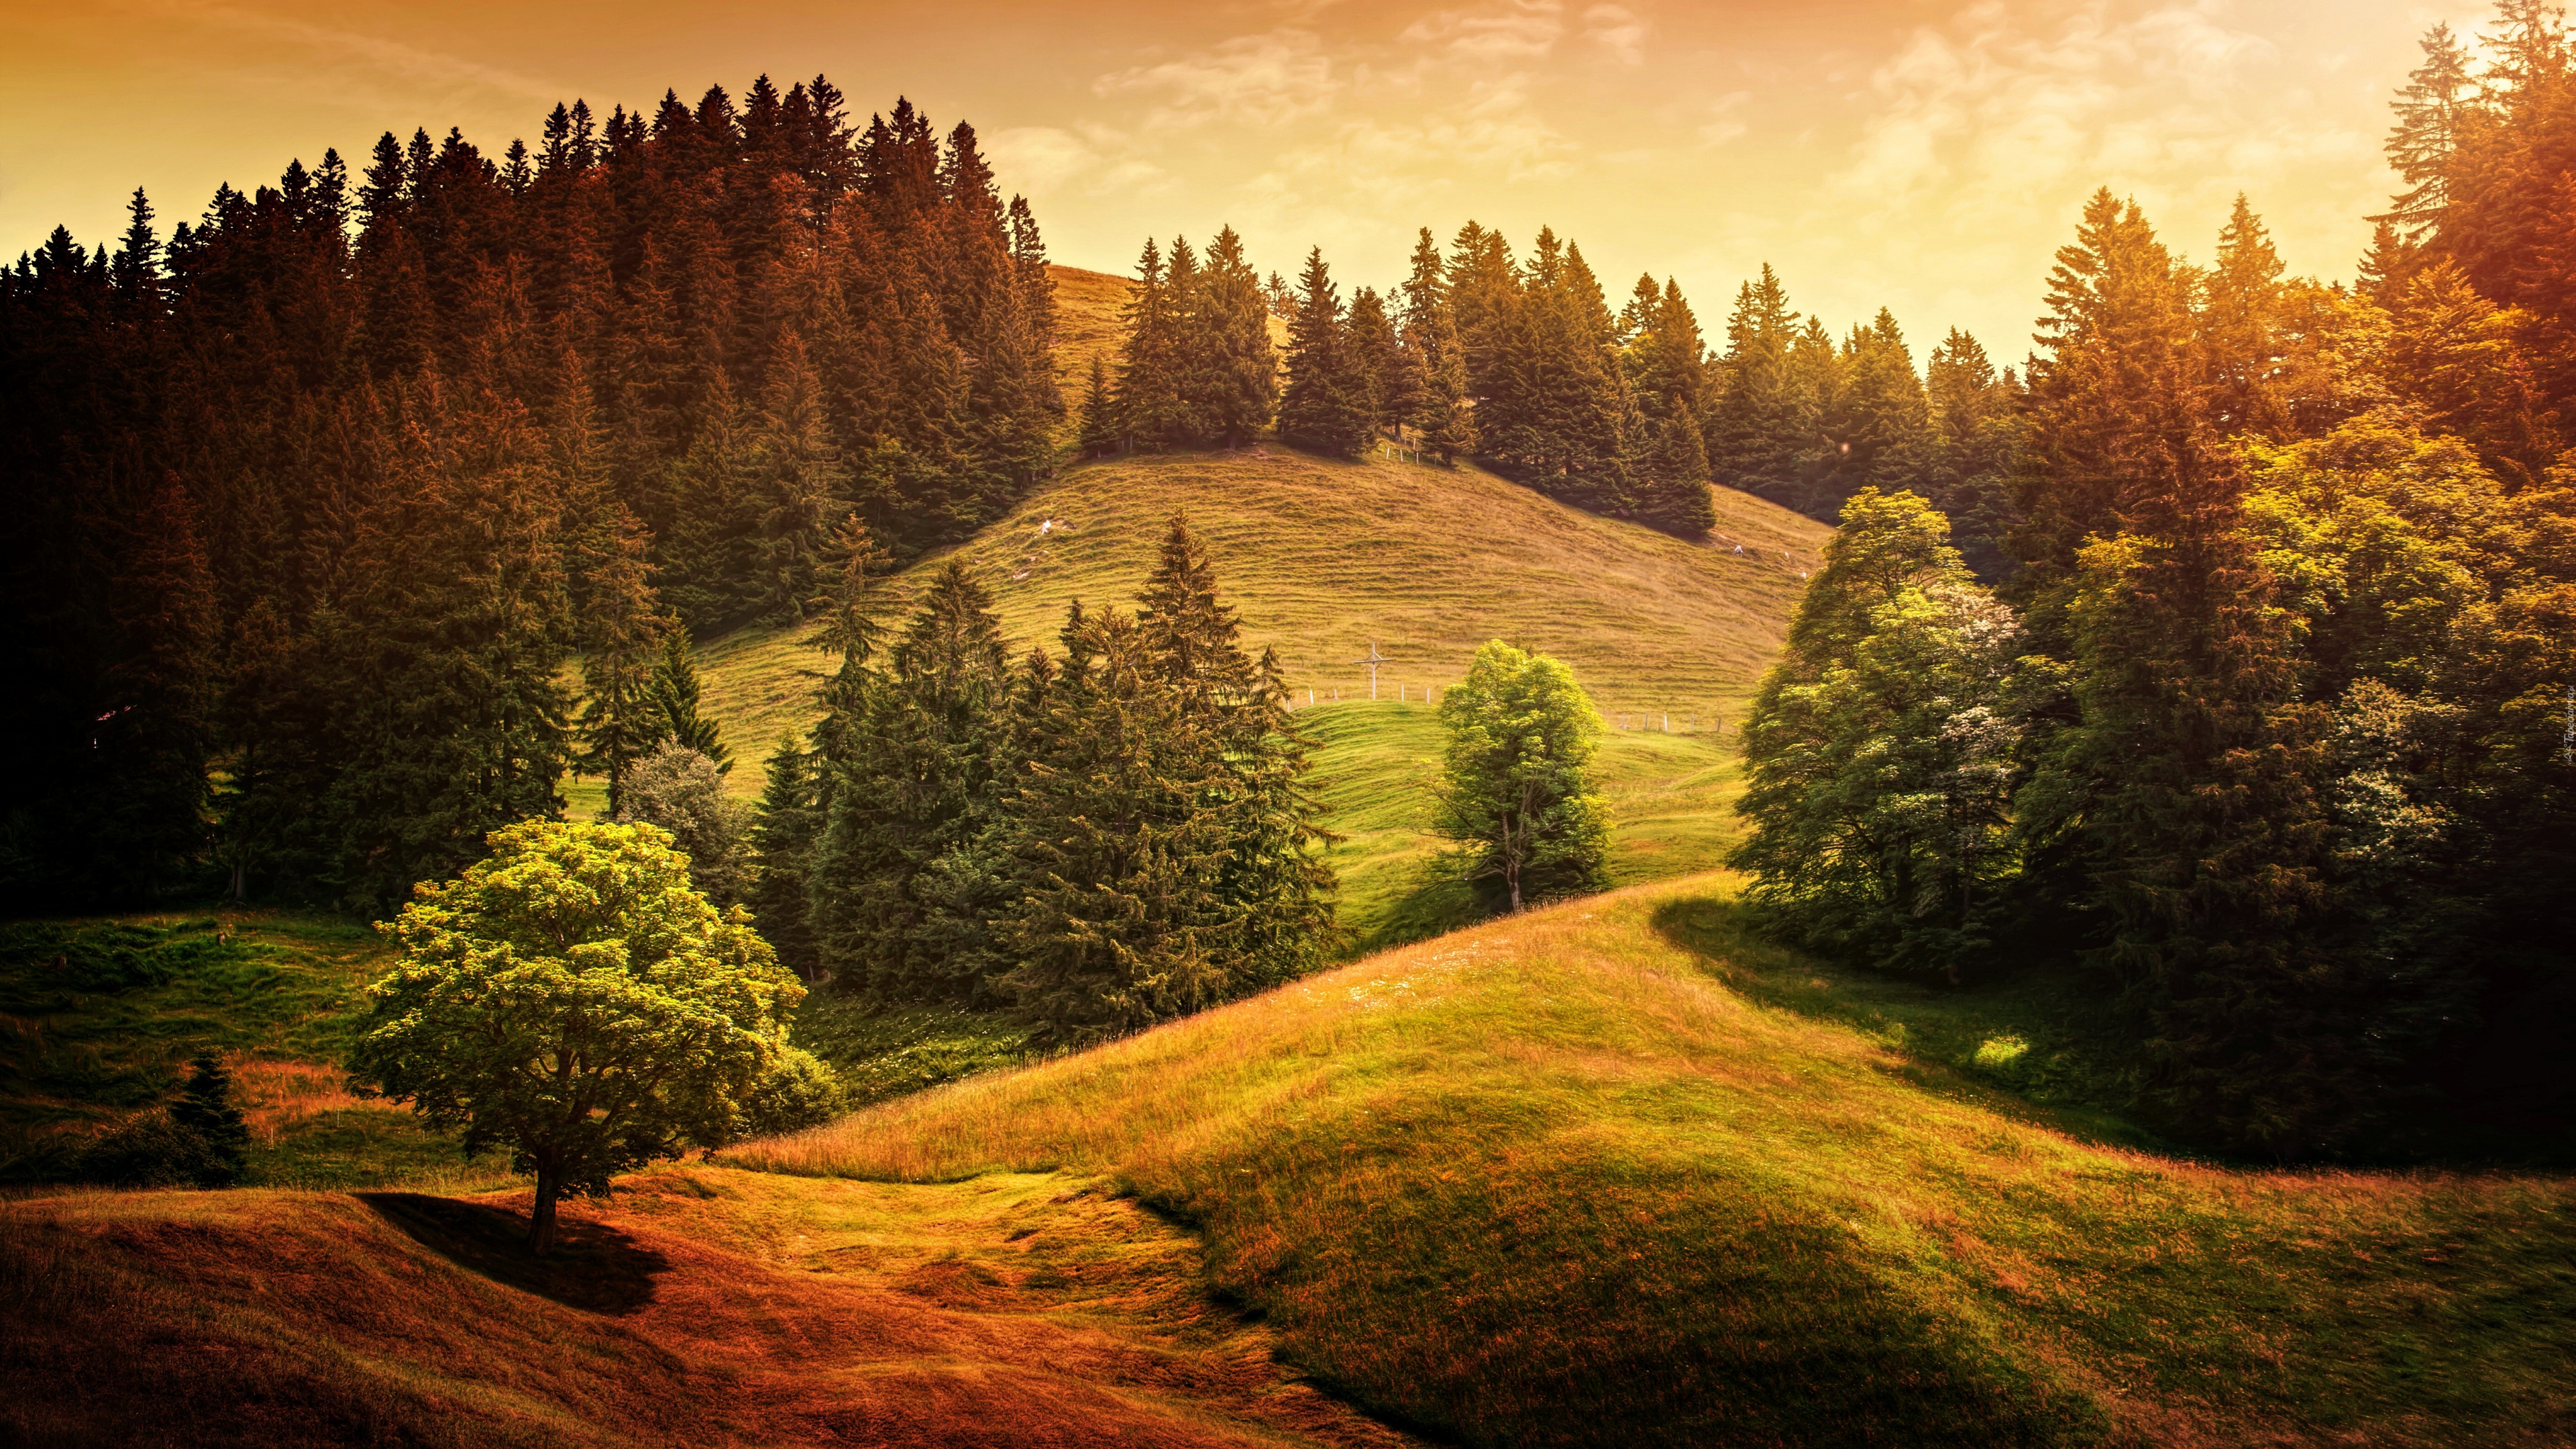 Green Trees on Brown Field During Daytime. Wallpaper in 3840x2160 Resolution